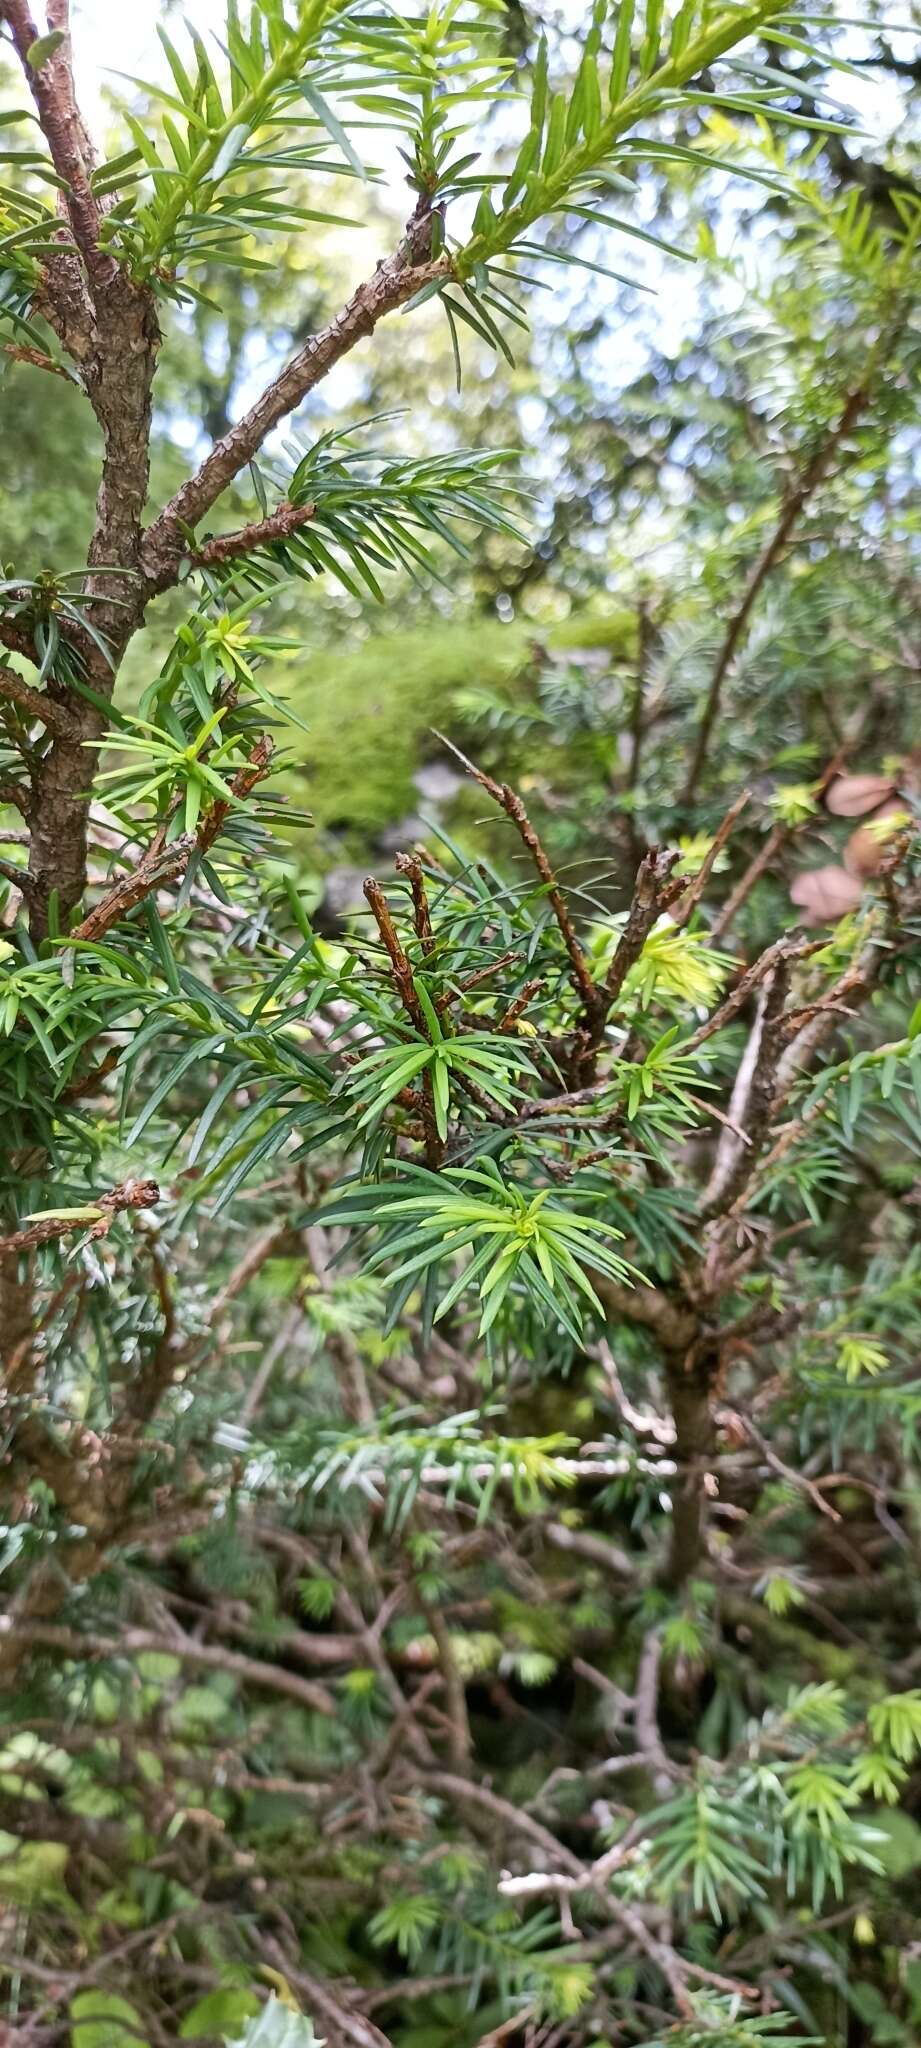 Image of Taxus contorta Griff.